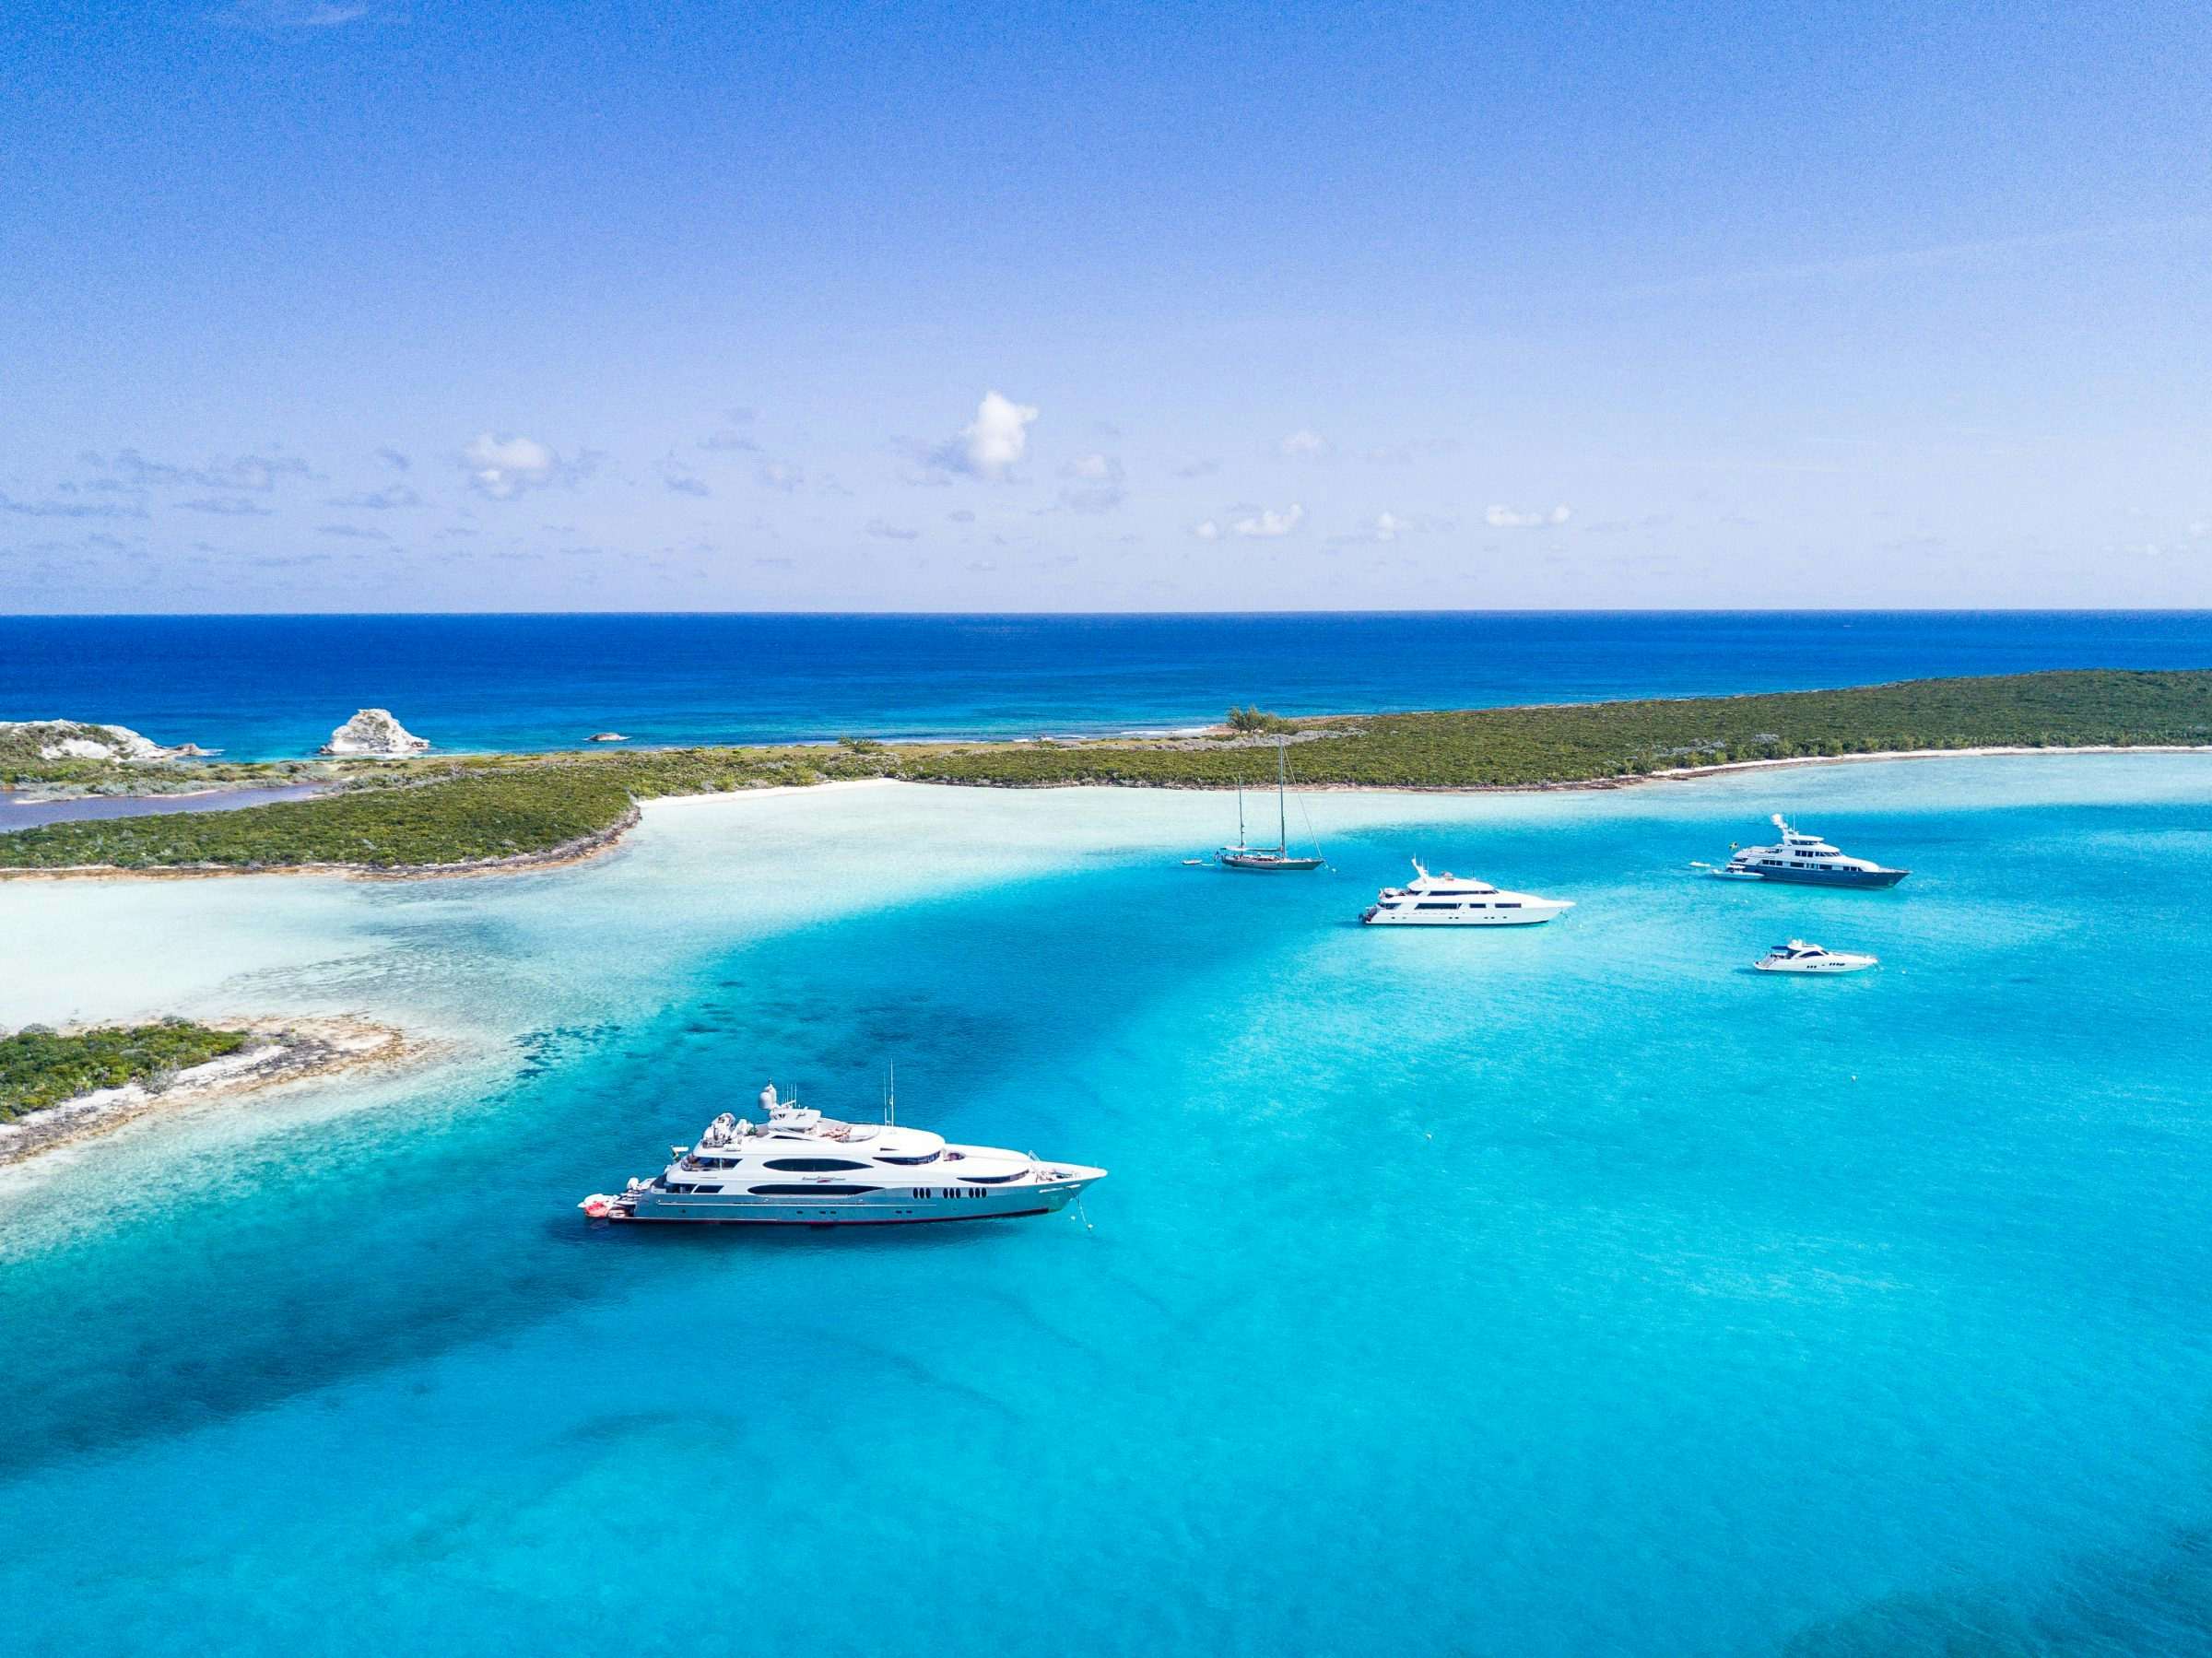 group of tandem superyacht charters at anchor in blue caribbean waters of bahamas